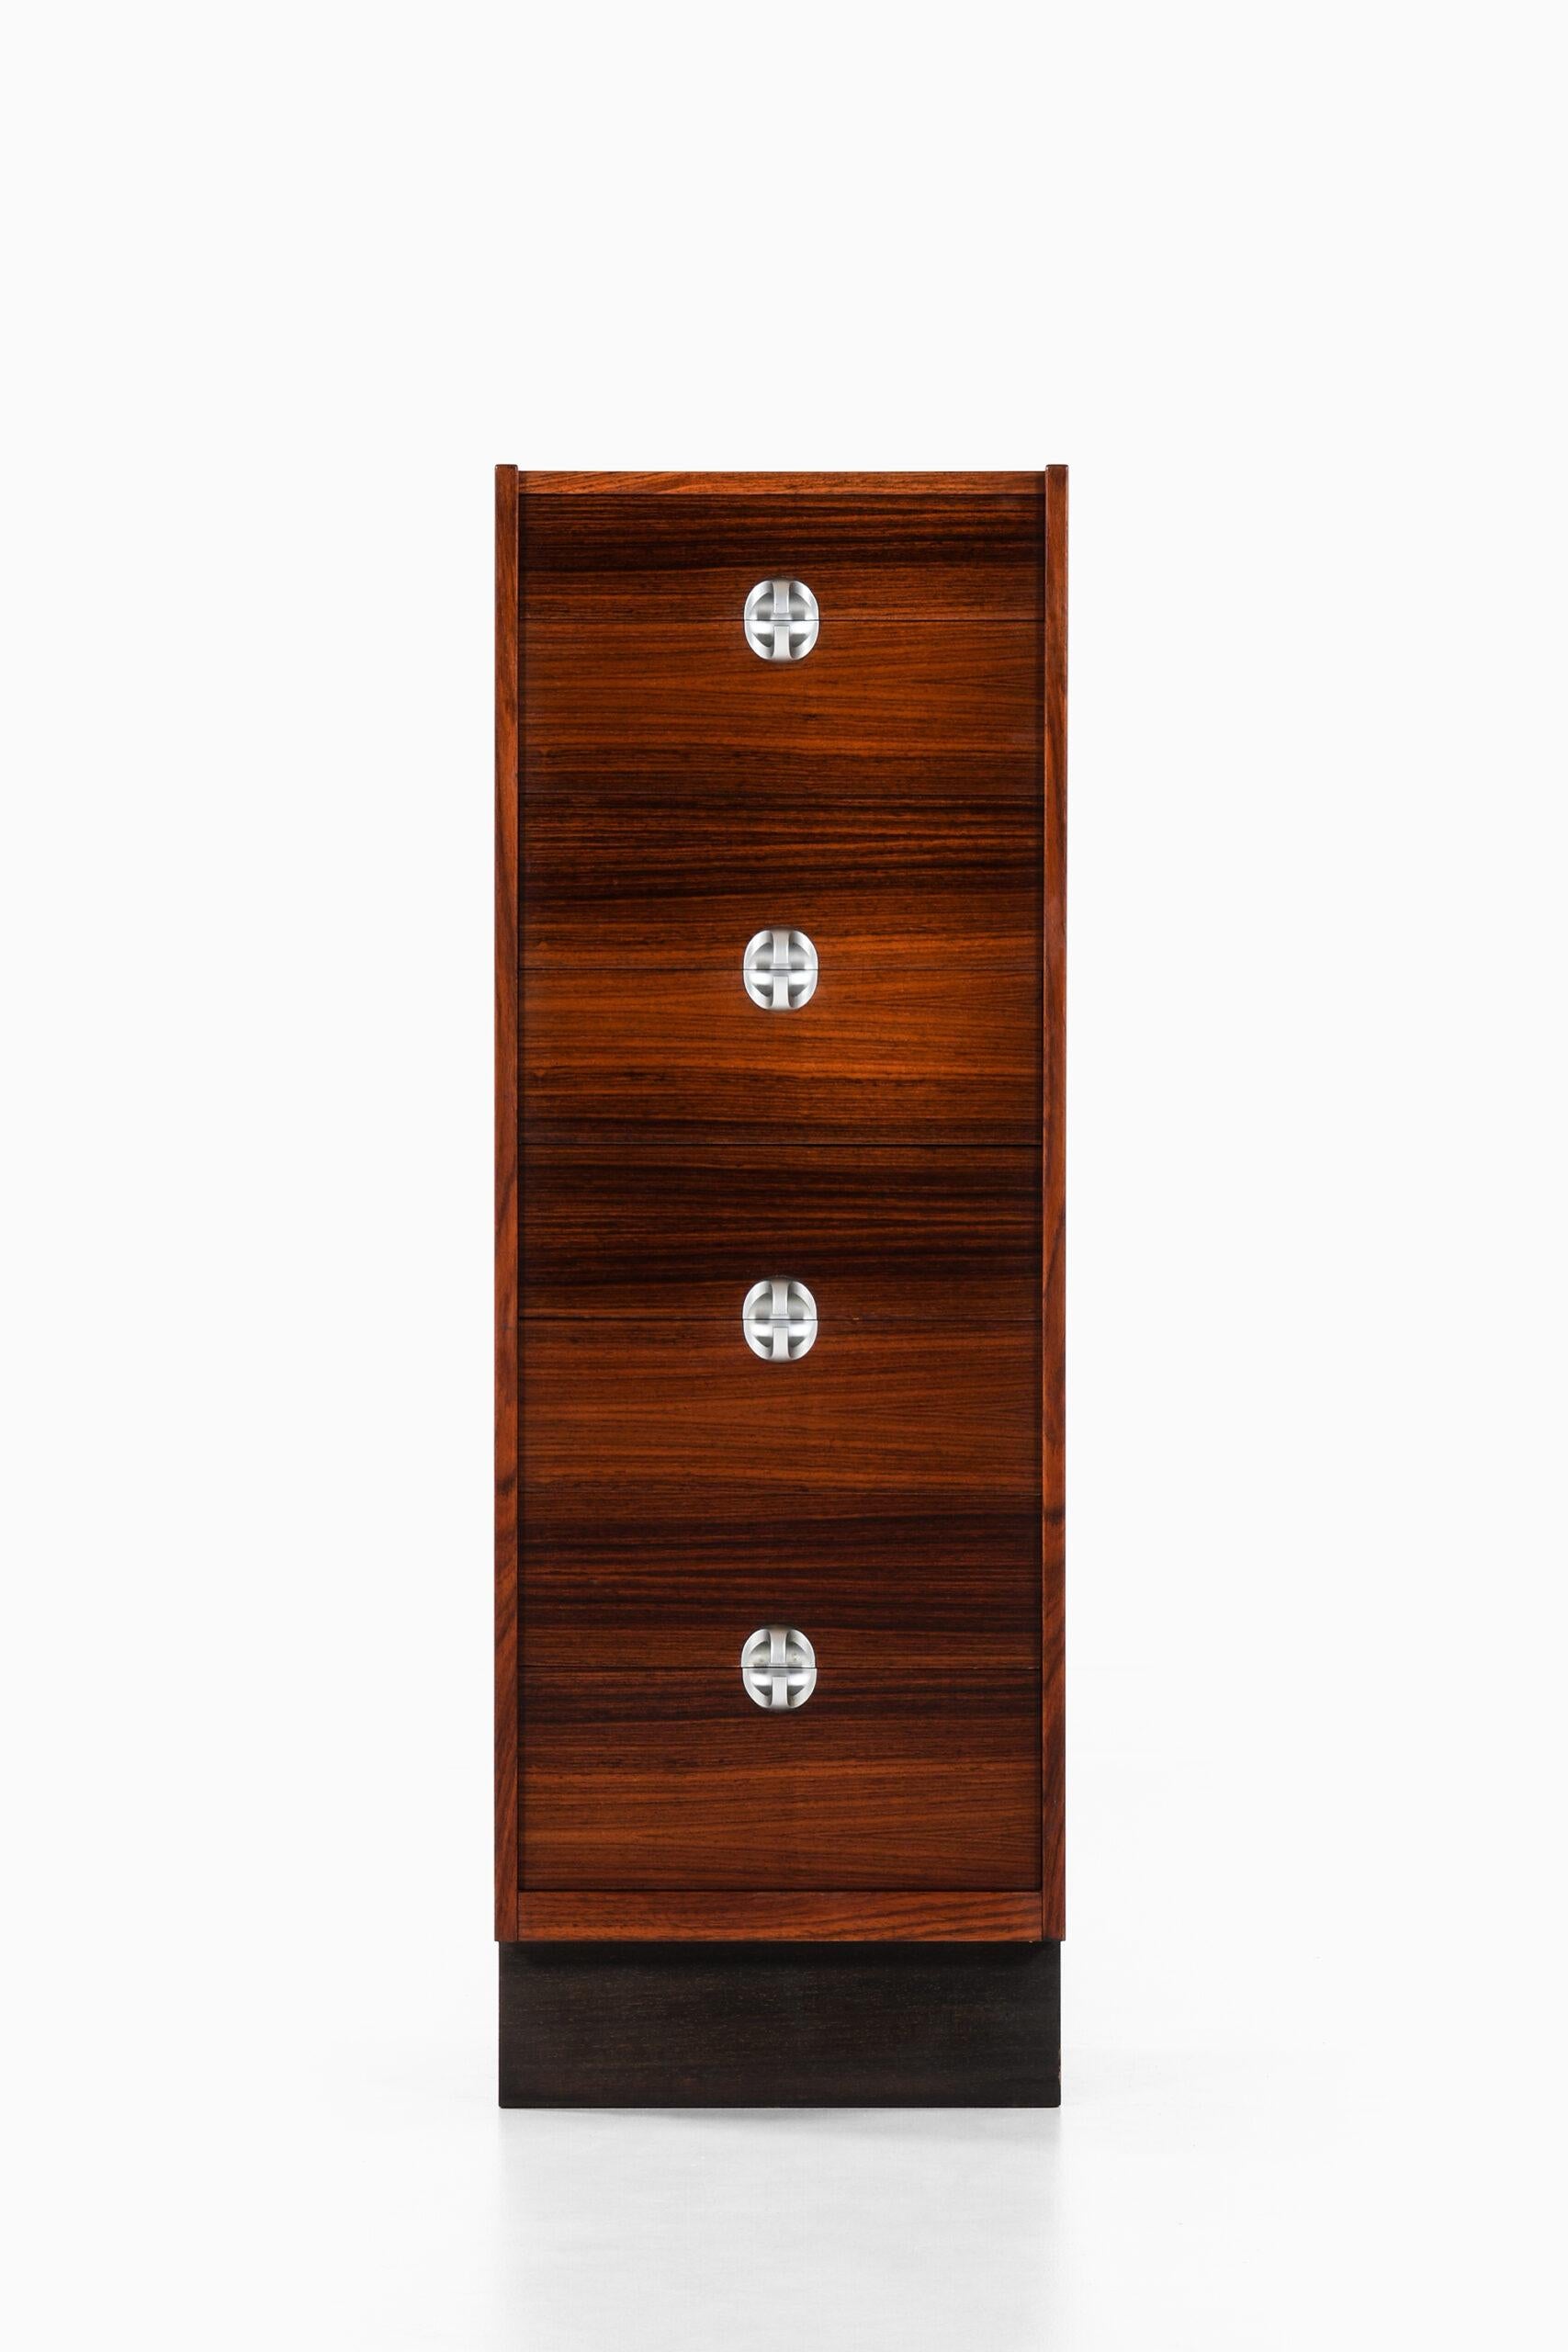 Mid-20th Century Bureau or Chest of Drawers Produced in Denmark